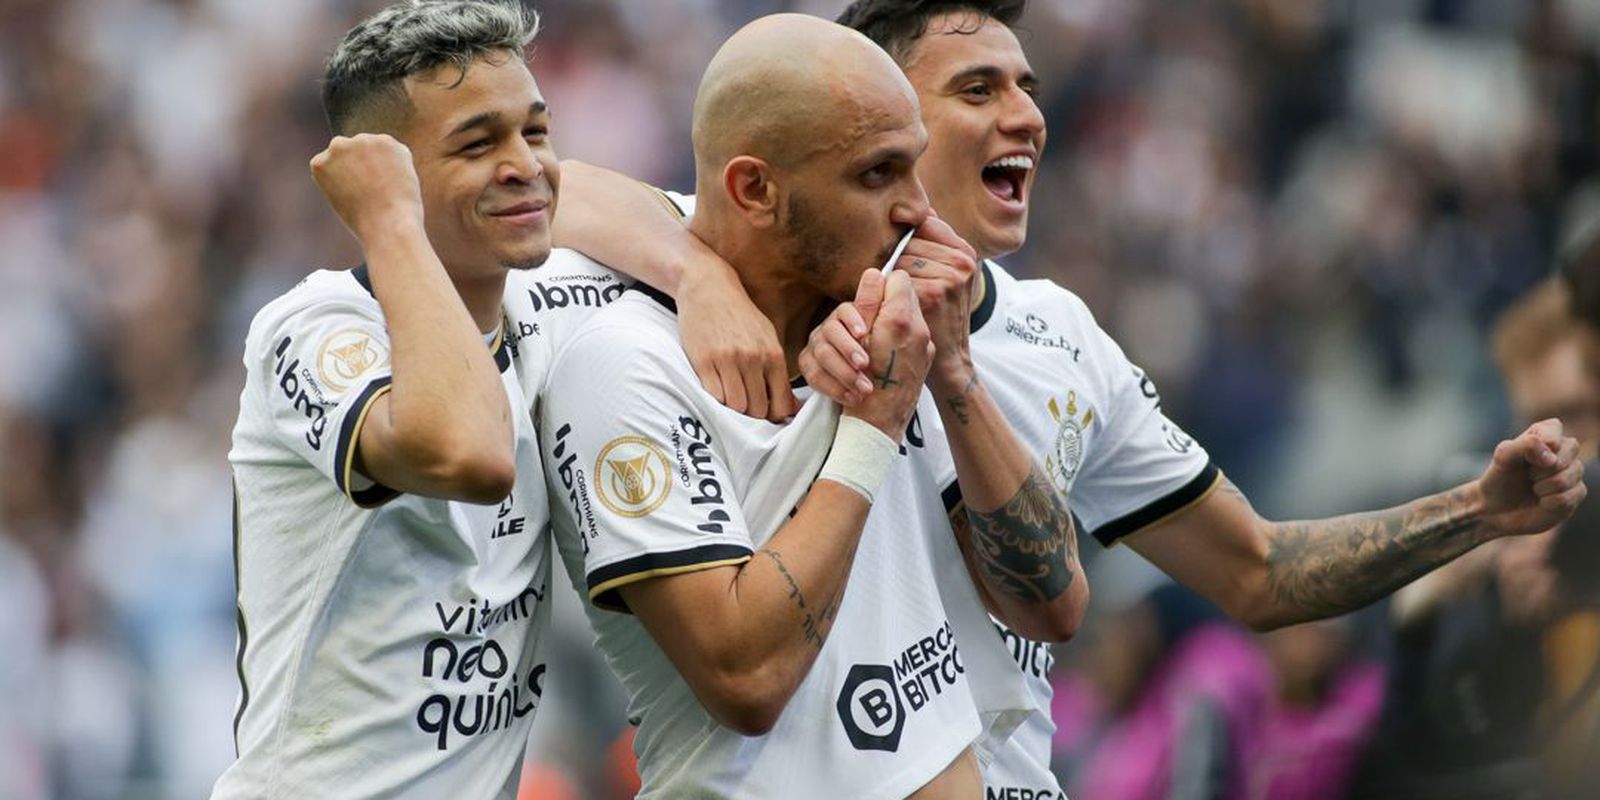 Corinthians wins Goiás and draws on points with leader Palmeiras